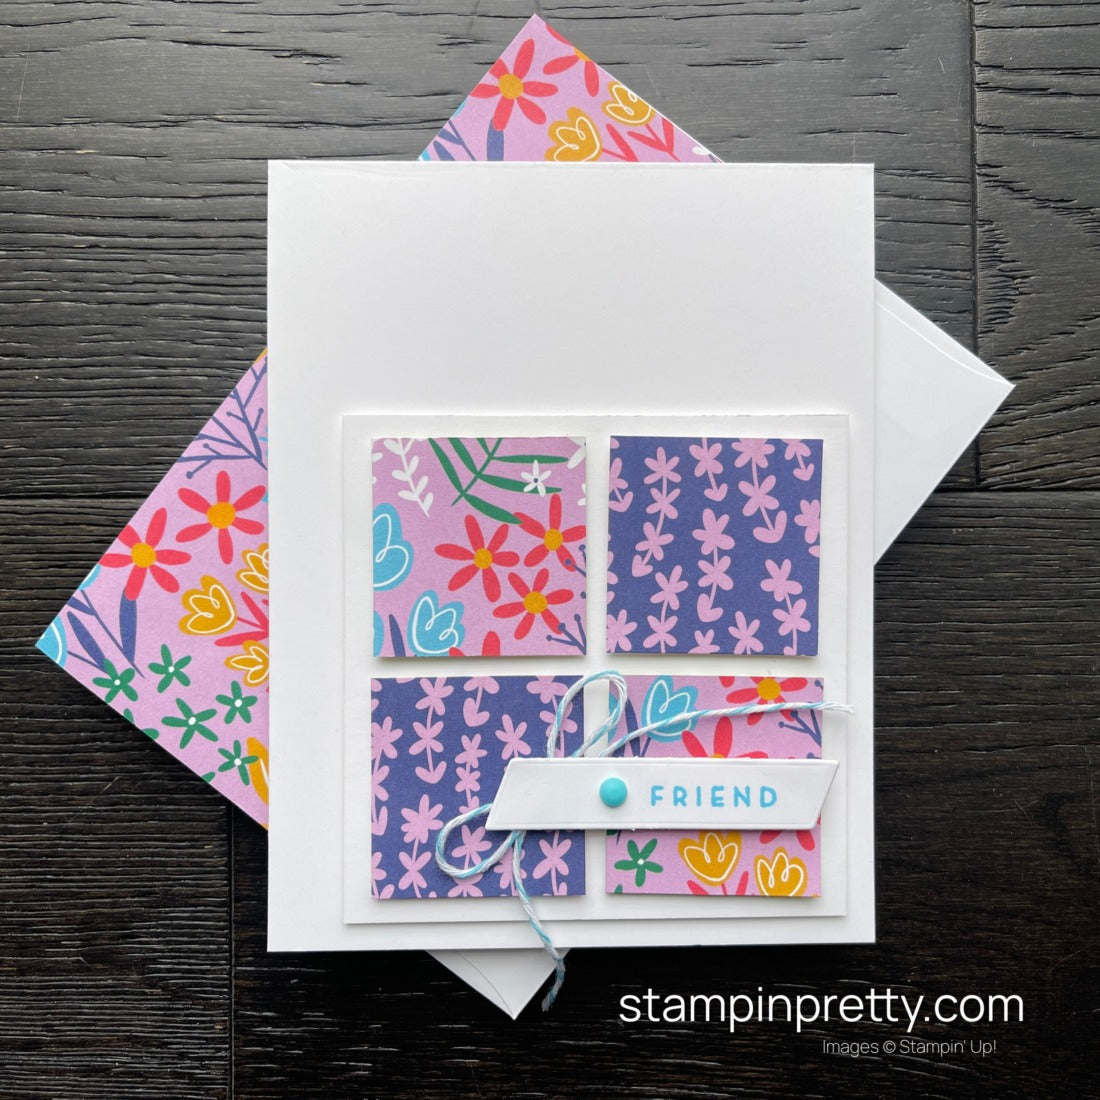 Stampin' Up! Flowers & More DSP